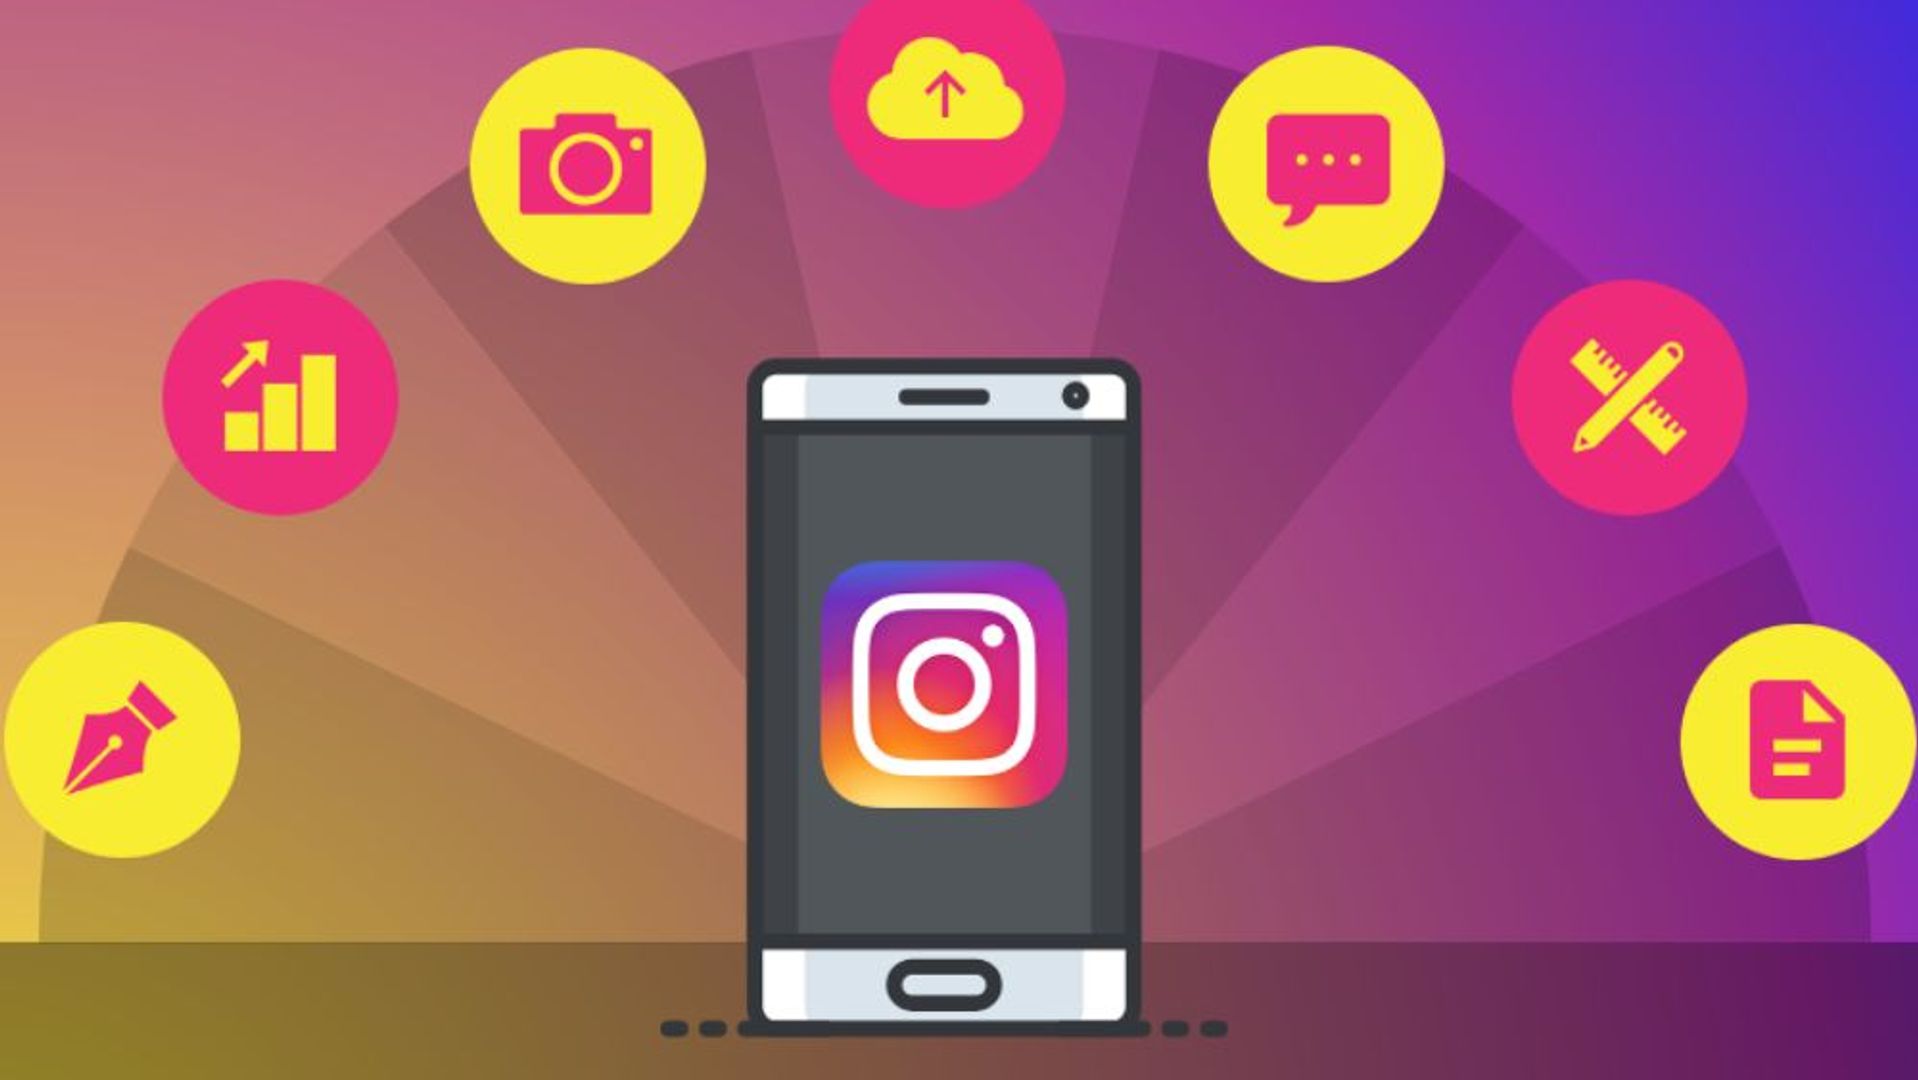 The Four Main Components of Instagram